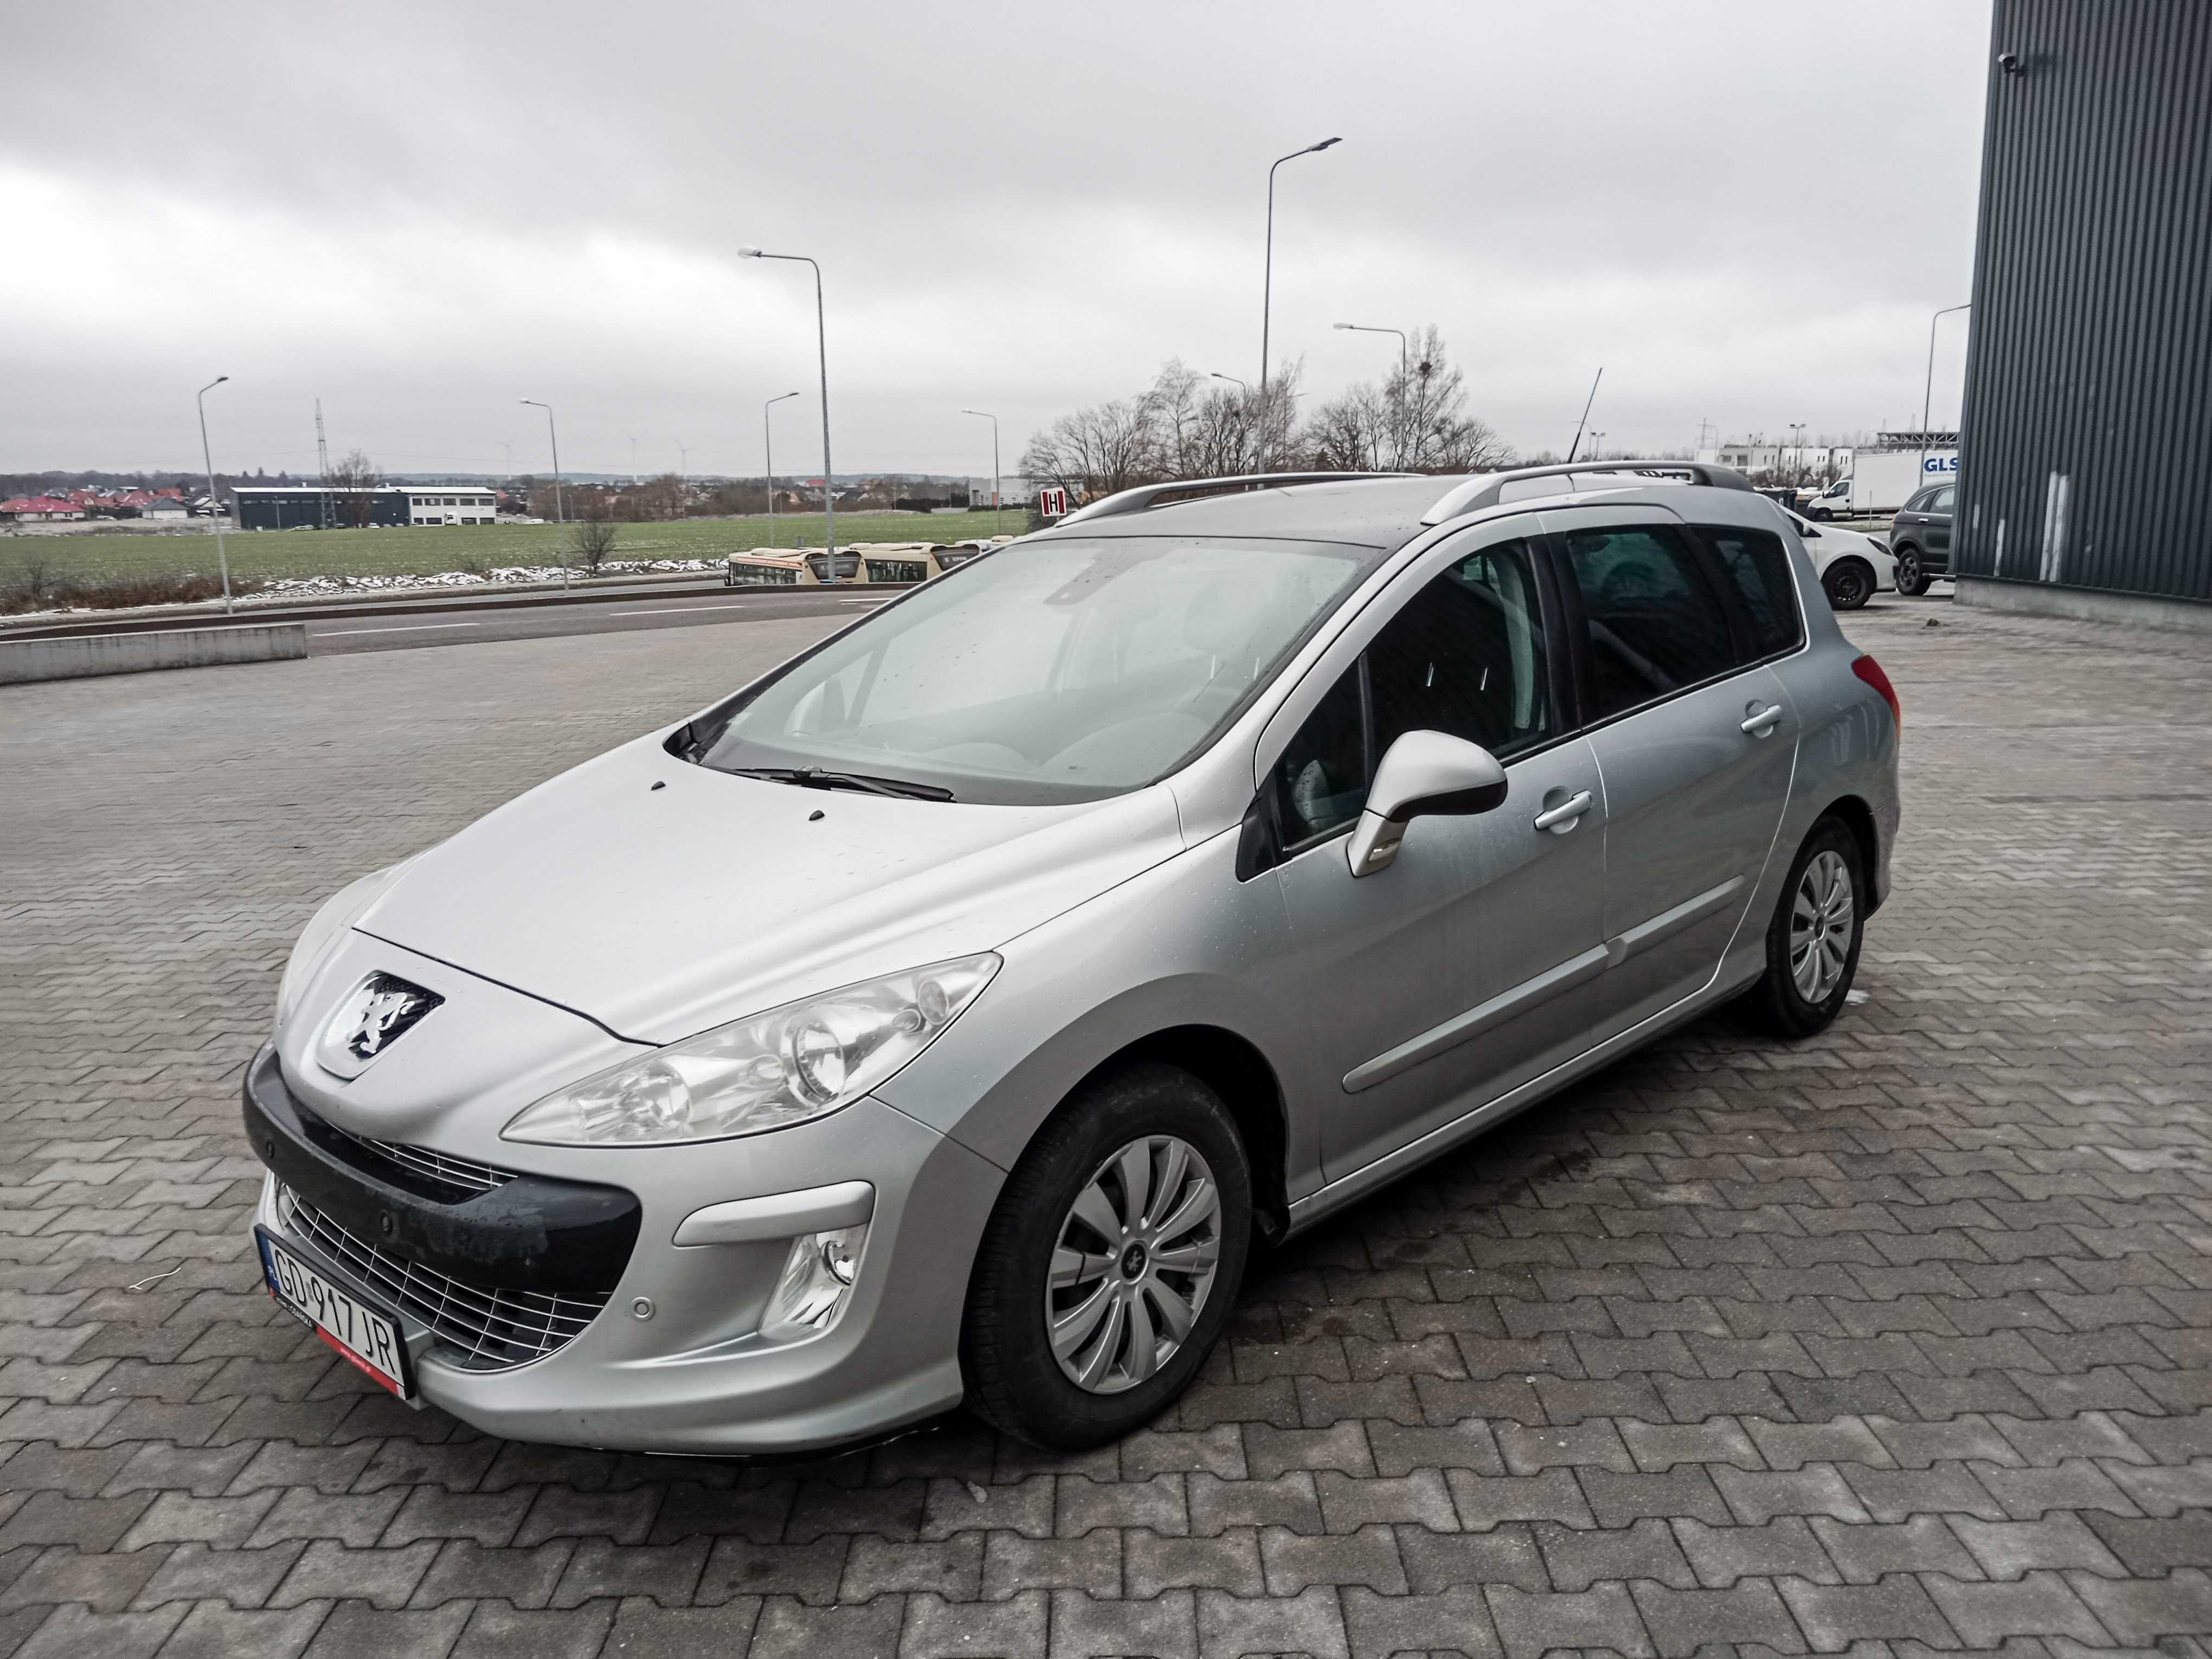 Peugeot 308 1.6 HDI, panoramiczny dach